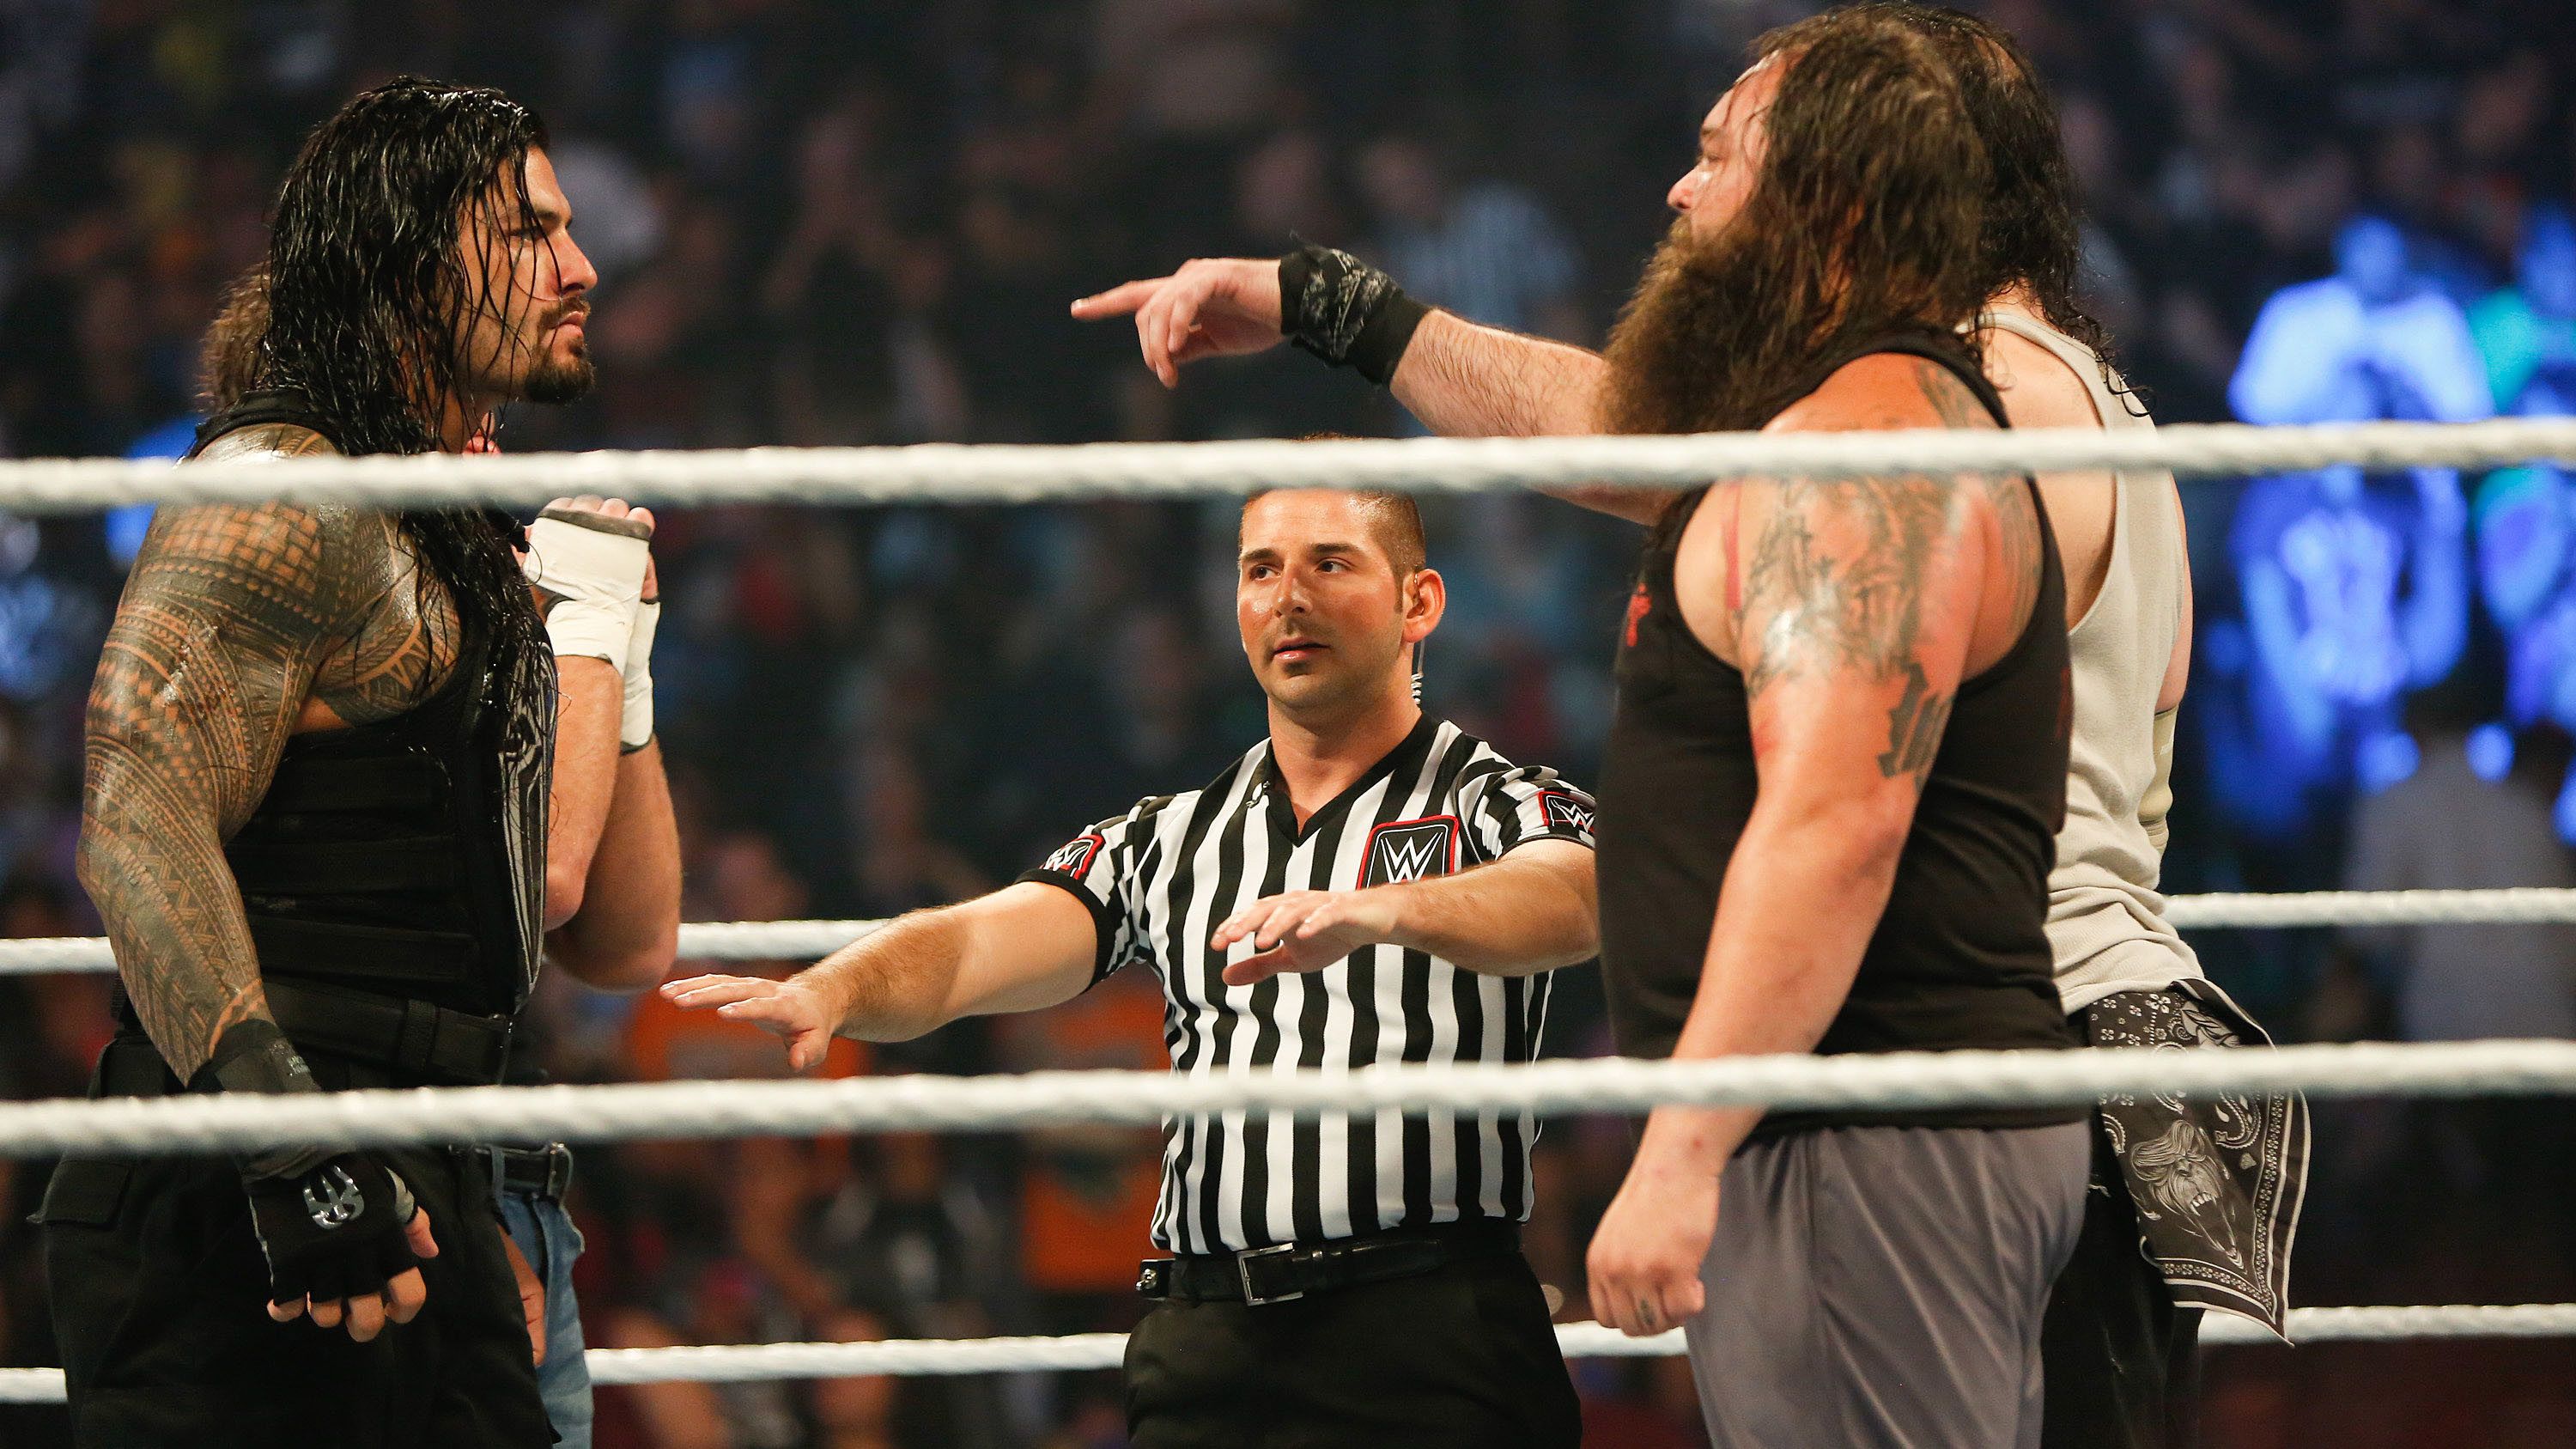 Roman Reigns and Bray Wyatt stare each other down at the WWE SummerSlam 2015.